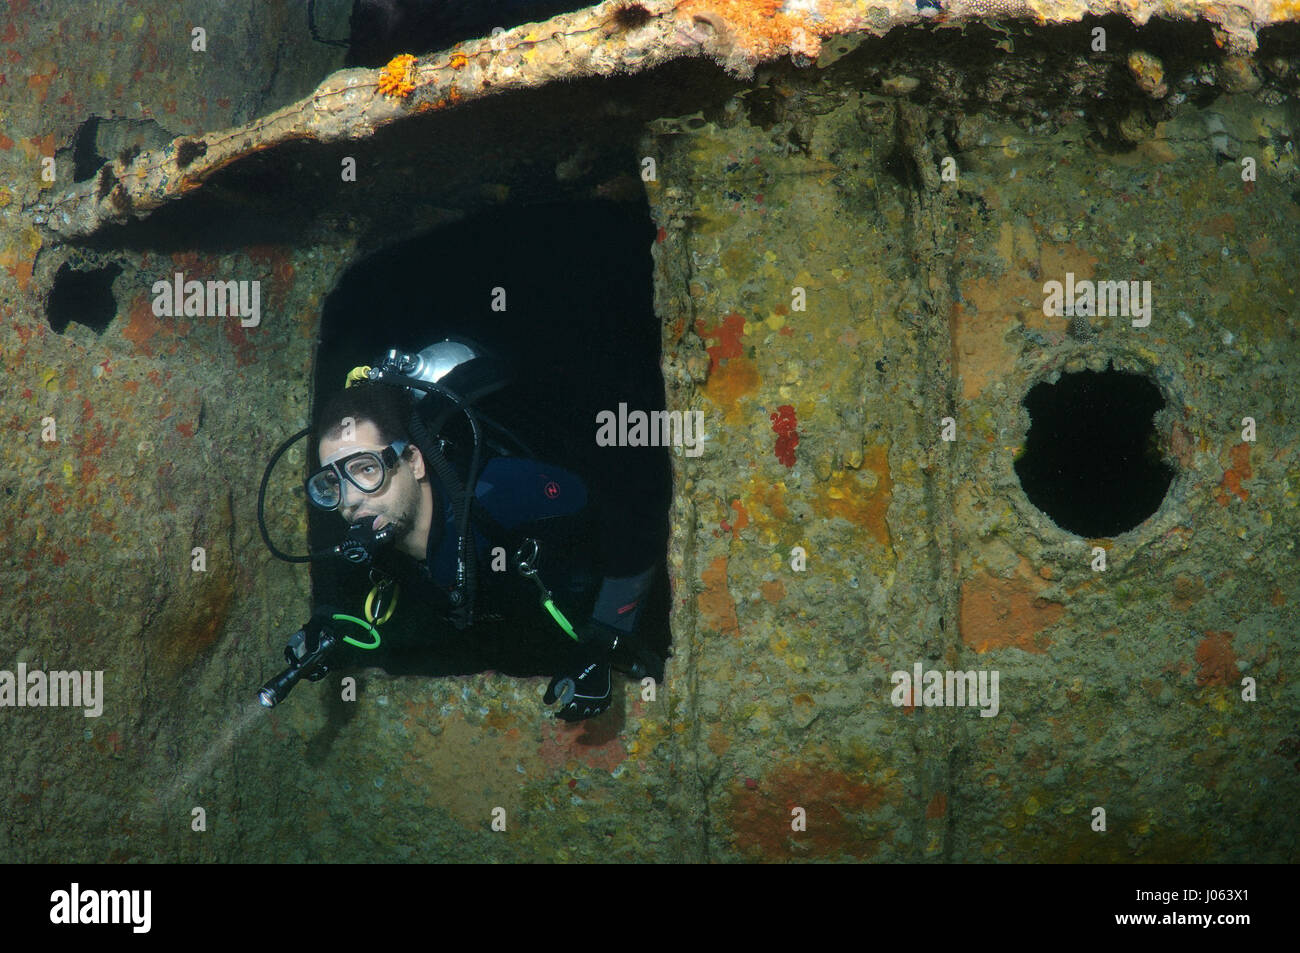 One diver explores the wreckage. EERIE underwater pictures show inside the wreckage of the sunken British World War Two ship SS Thistlegorm on the seventy-fifth anniversary of her sinking. The series of images show the rusted remains of the merchant navy ship’s cargo which includes motorbikes, army trucks and an aircraft propeller. Other pictures show how sea life have been inhabiting the wreckage. Stock Photo